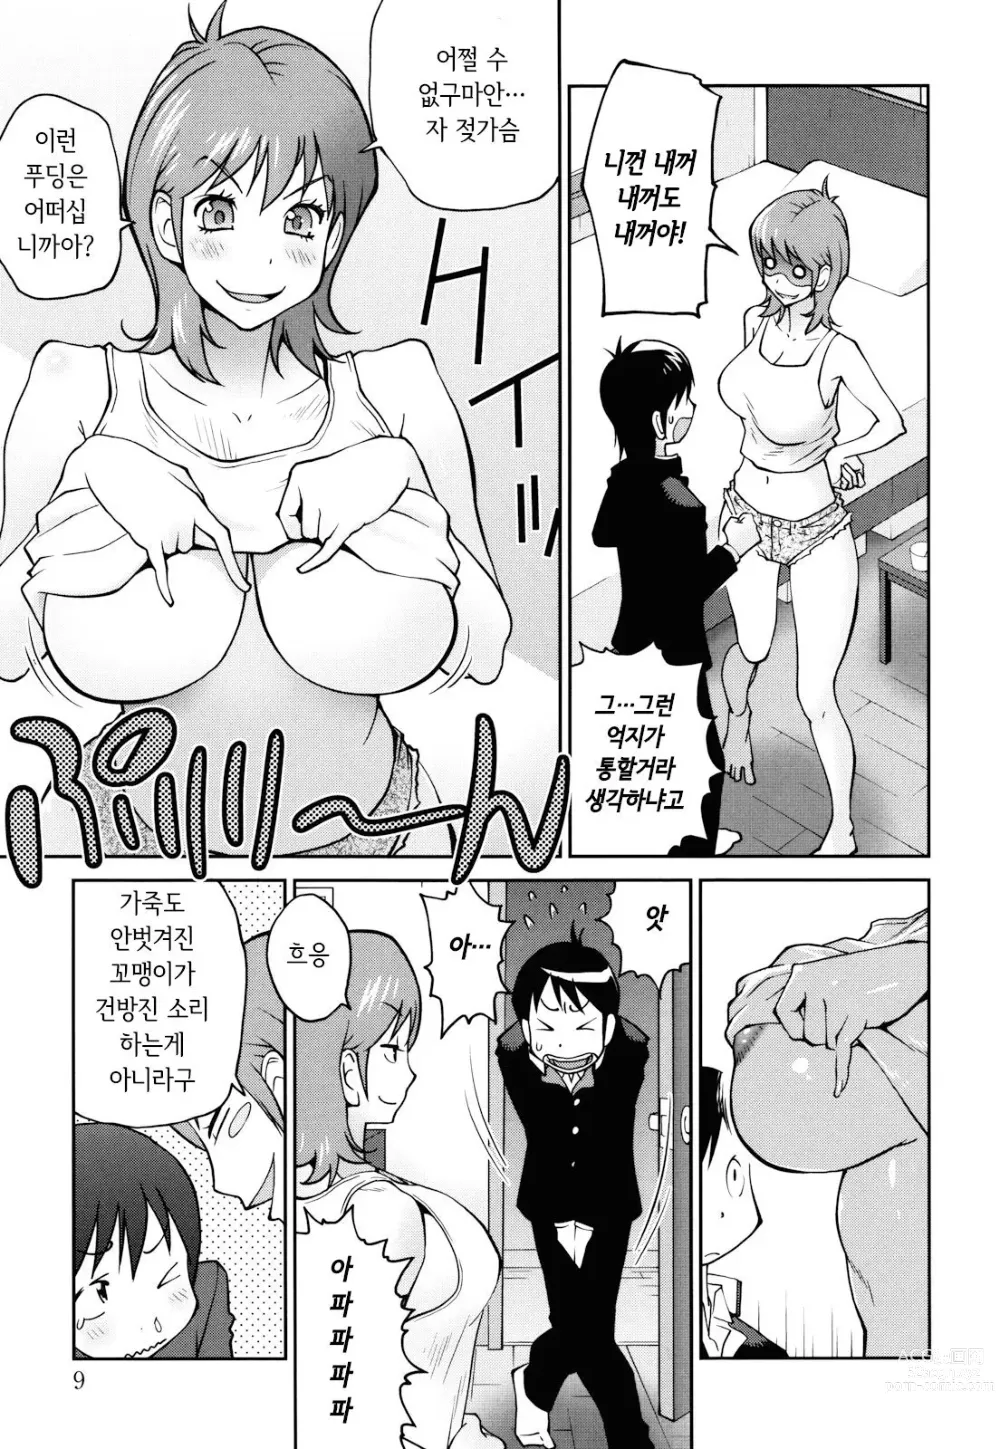 Page 9 of manga NAKED PARTY